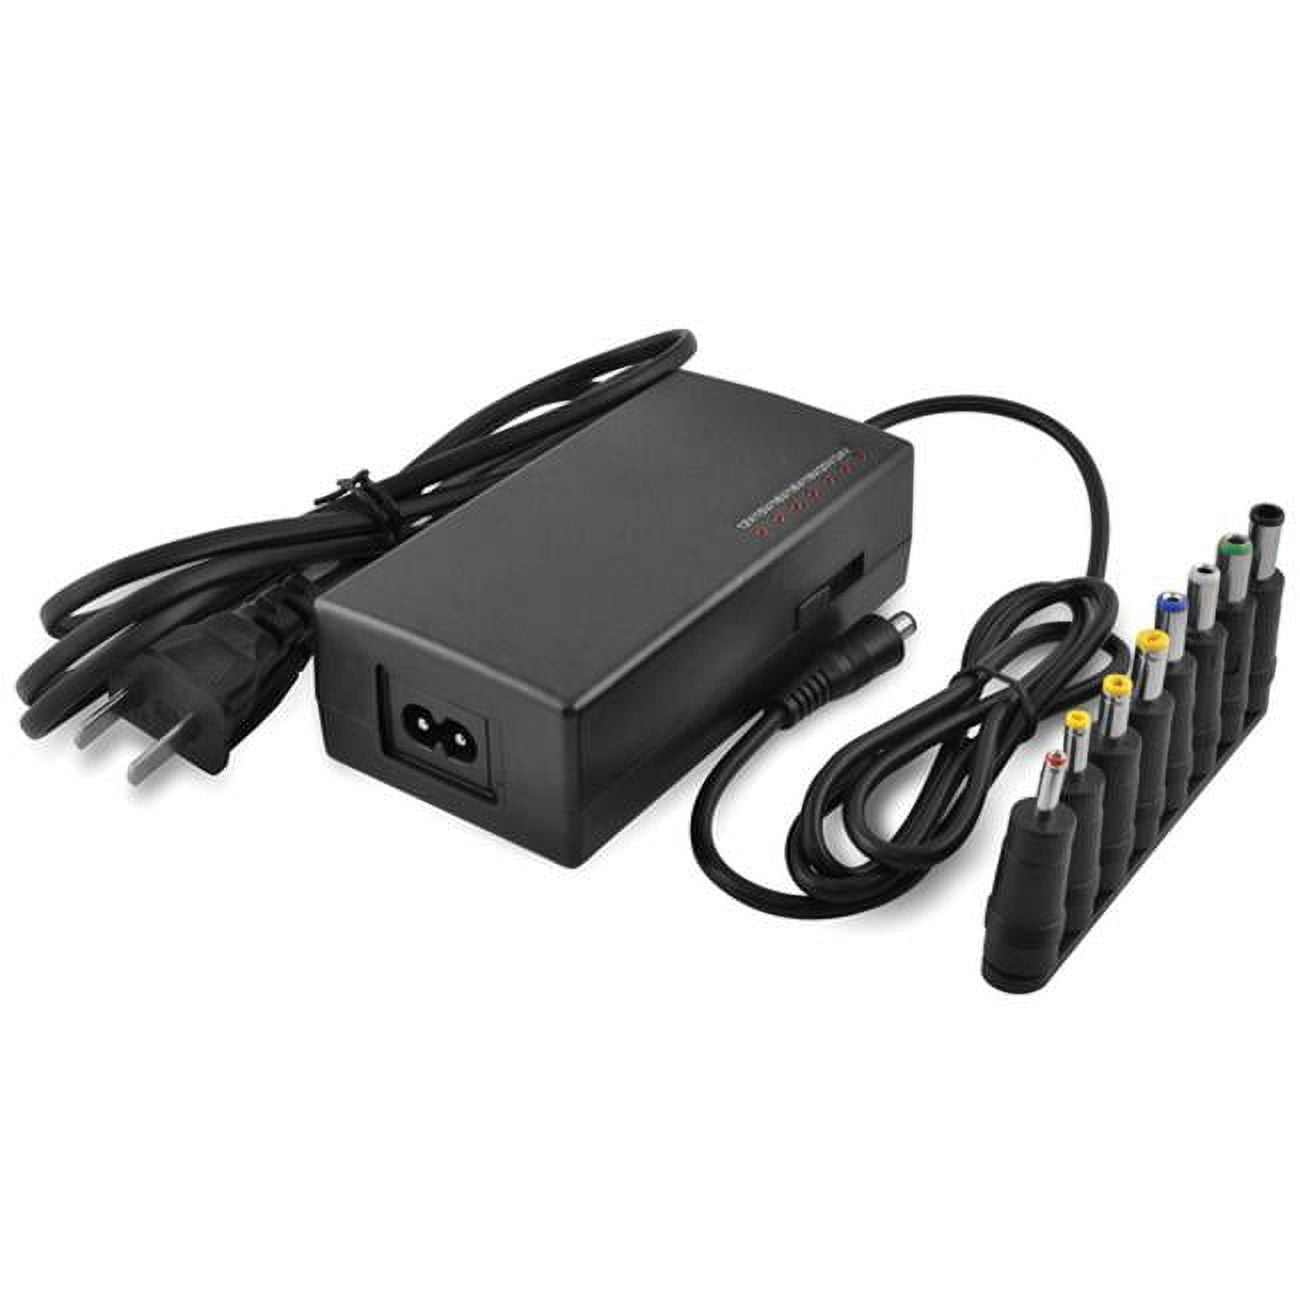 Chargeur adaptable PC portable SONY 19.5V 4.74A - PC portable